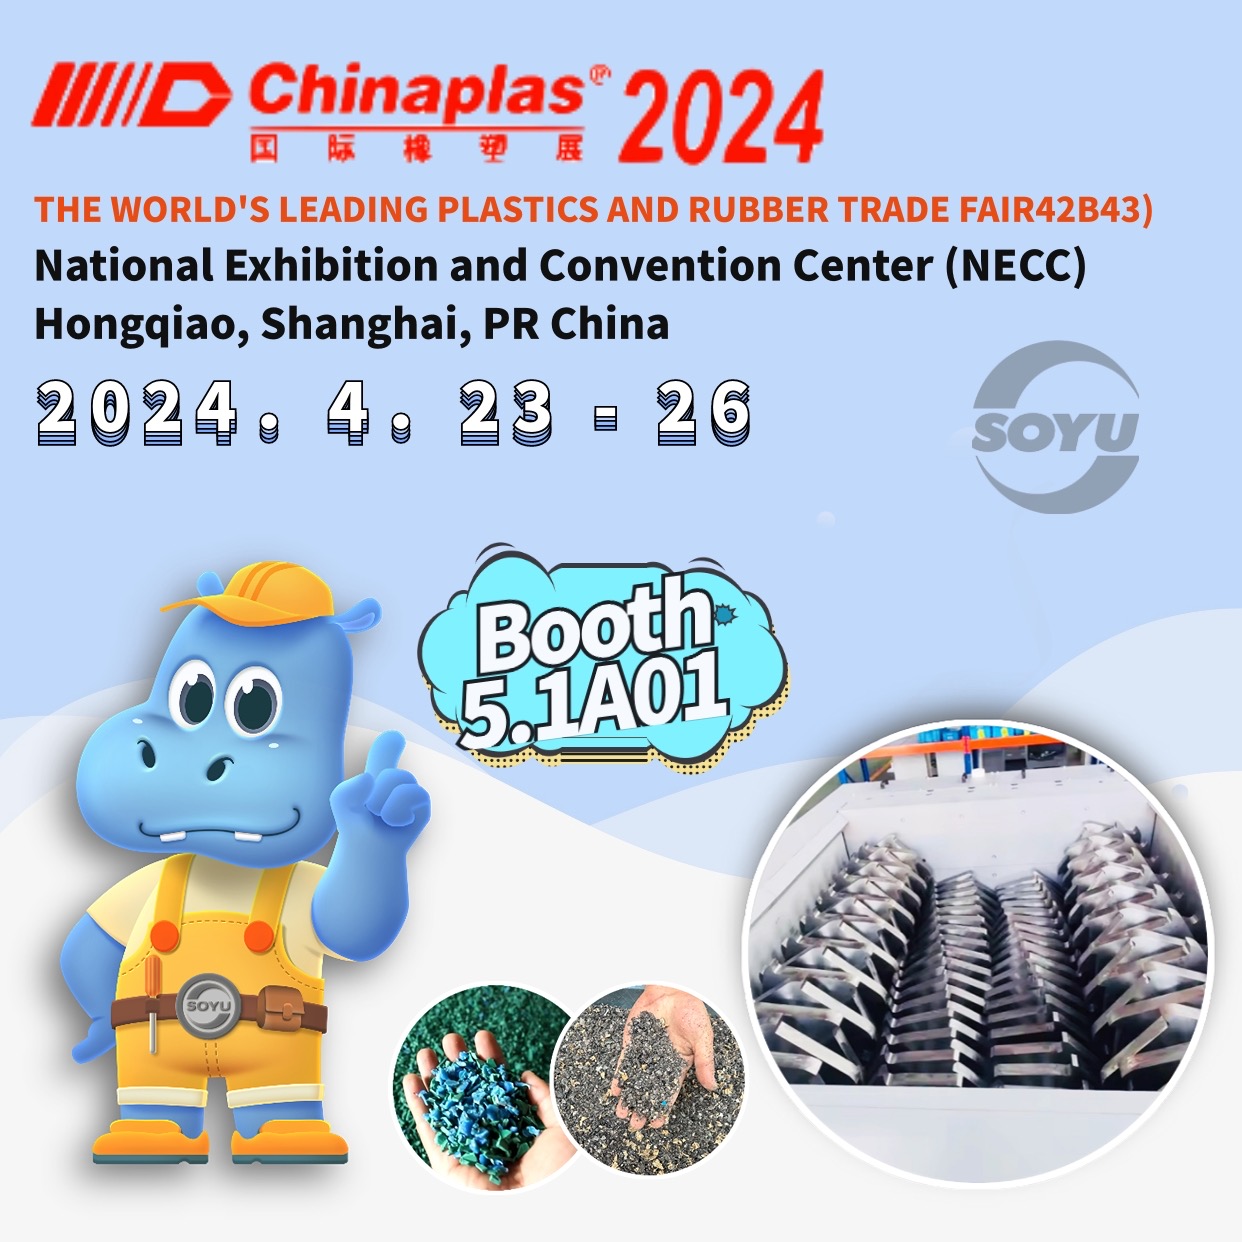 Join us at ChinaPlas 2024 on April 23-26, 2024!